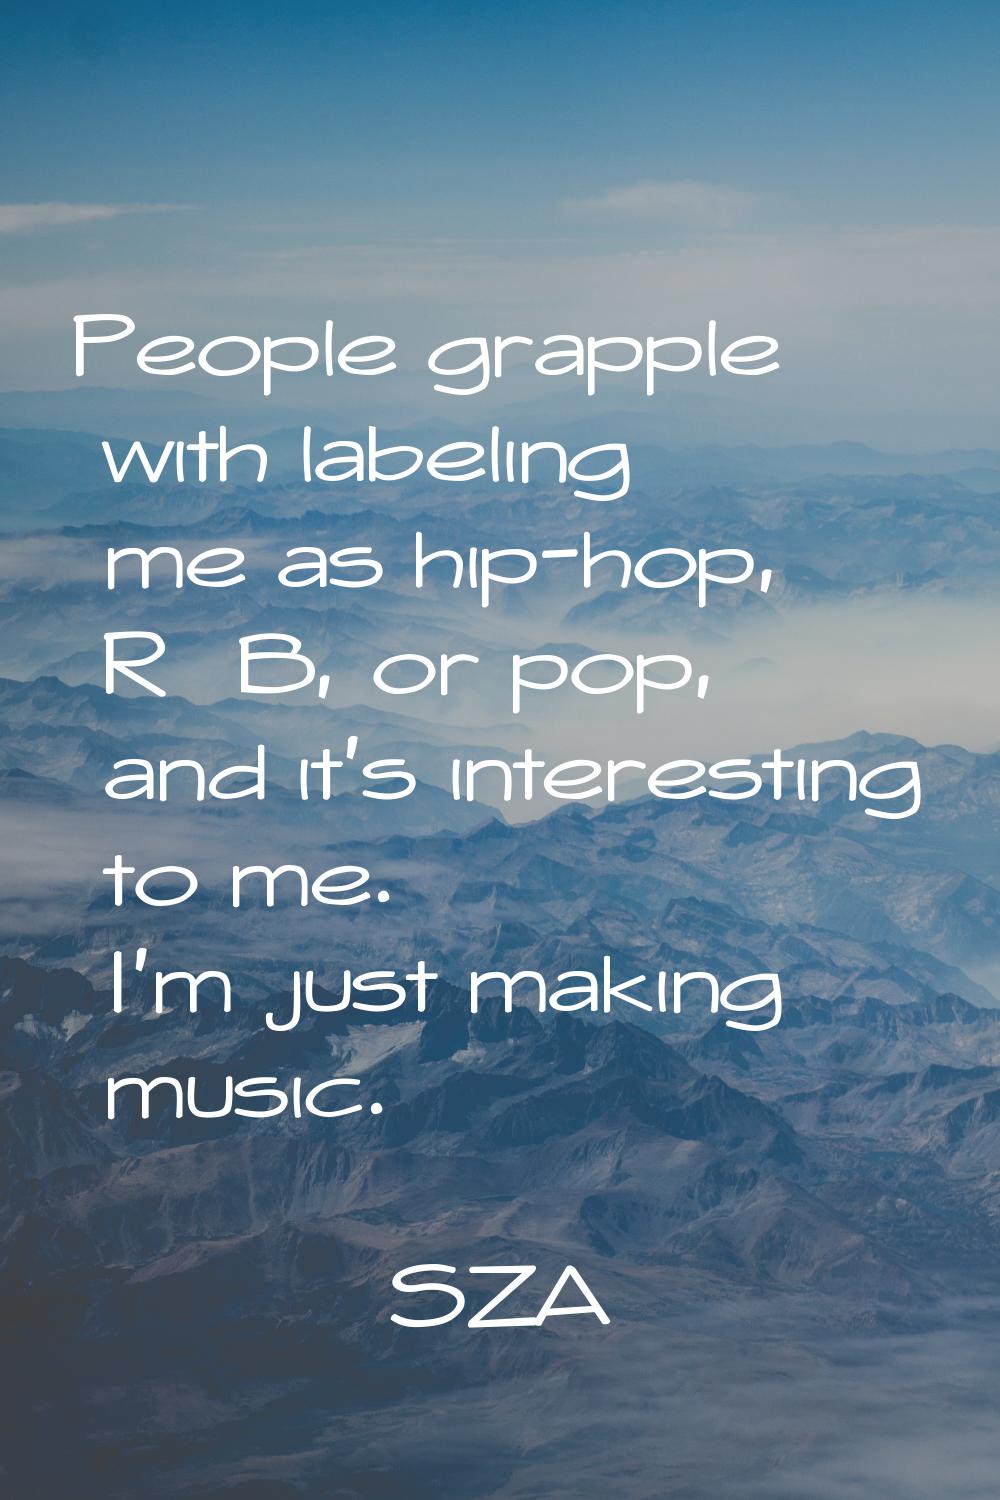 People grapple with labeling me as hip-hop, R&B, or pop, and it's interesting to me. I'm just makin